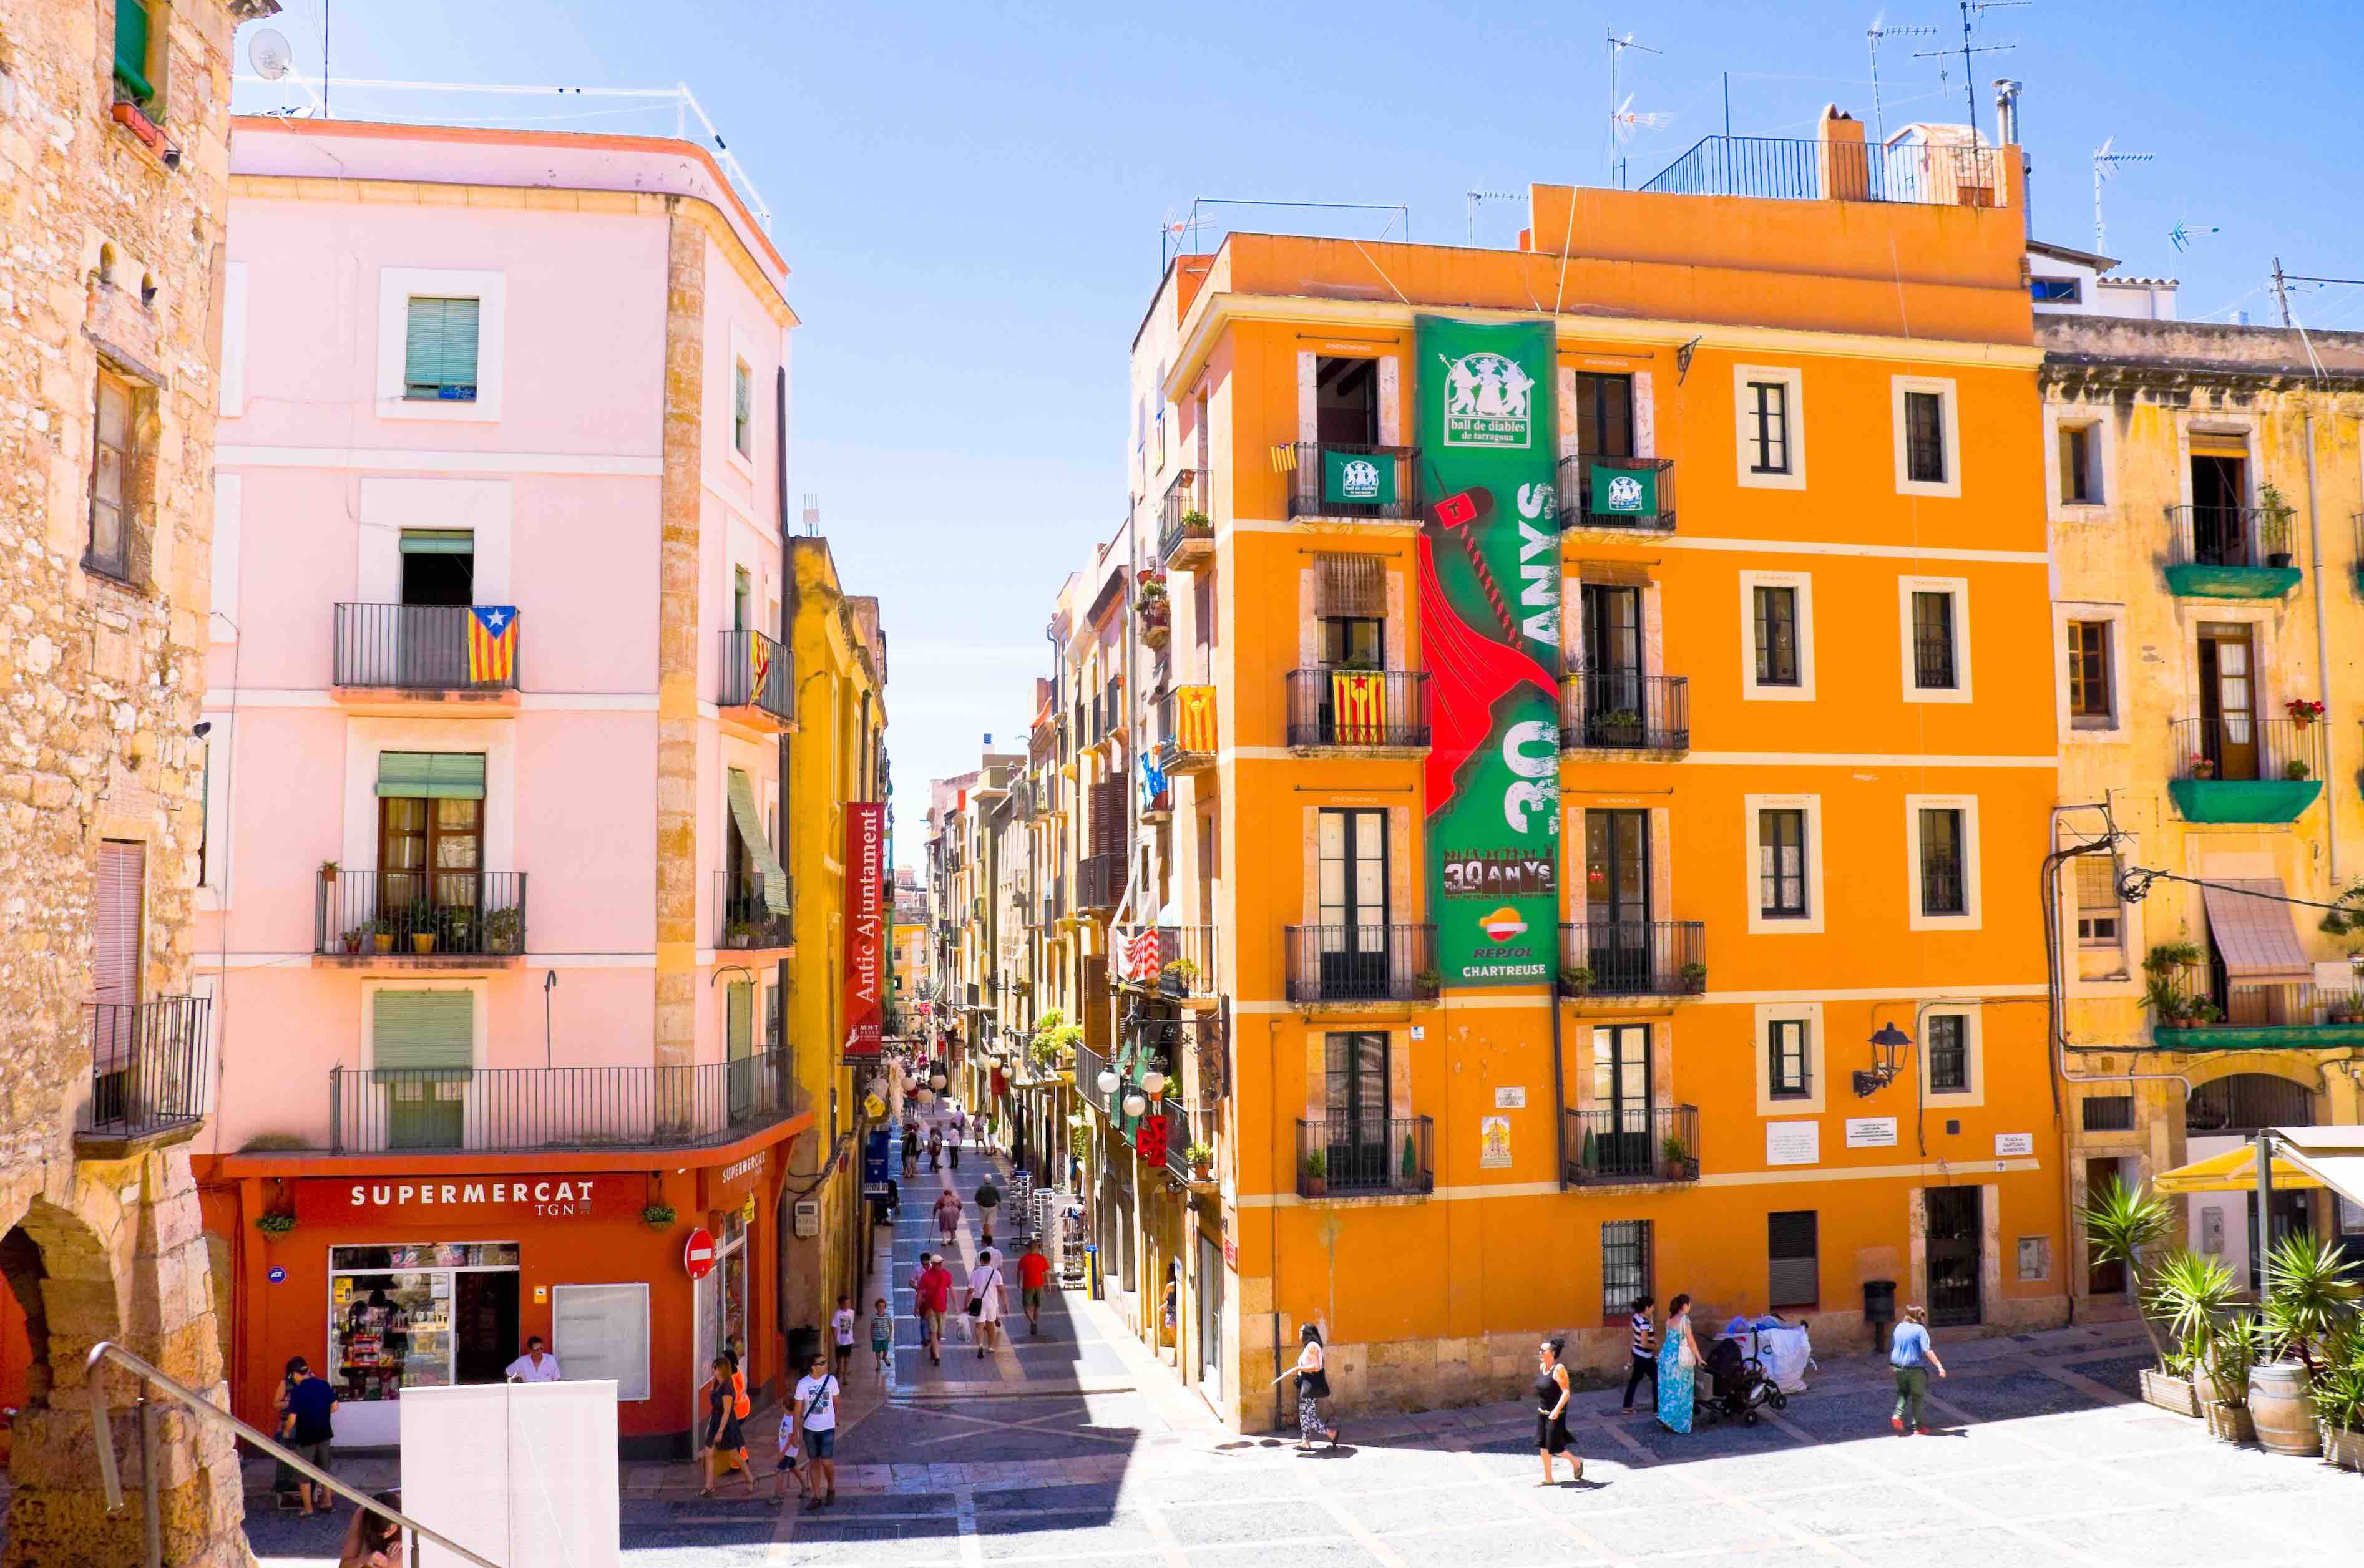 The property market in Spain: useful statistics for buyers and tenants